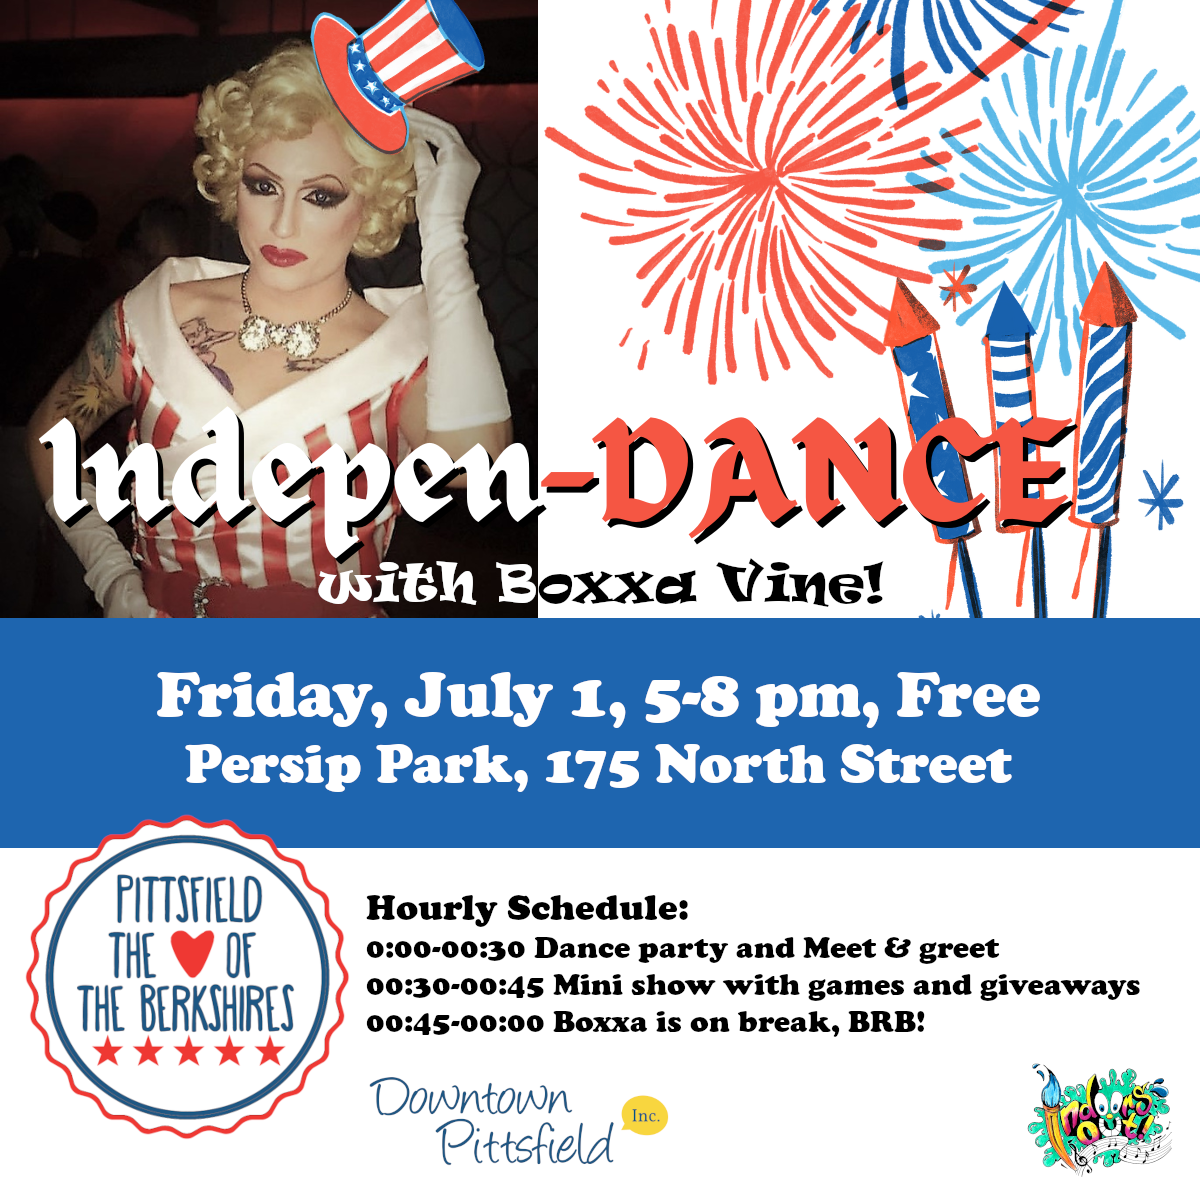 Downtown Pittsfield, Inc. and Indoors Out! present Indepen-DANCE by Boxxa Vine!